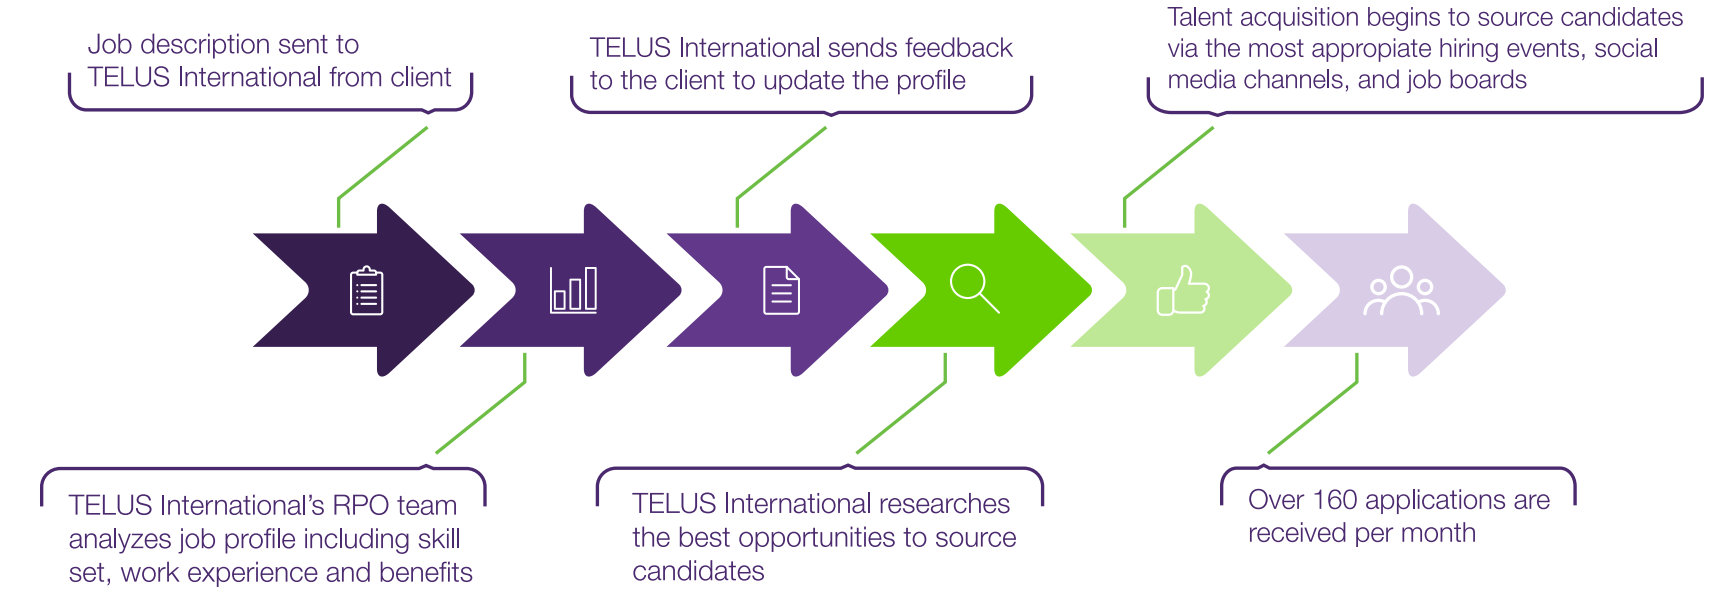 A flow chart explaining the process of the TELUS International RPO team. Step 1: Job description sent to TELUS International from client. Step 2: TELUS International's RPO team analyzes job profile including skill set, work experience and benefits. Step 3: TELUS International sends feedback to the client to update the profile. Step 4: TELUS International researches the best opportunities to source candidates. Step 5: Talent acquisition begins to source candidates via the most appropriate hiring events, social media channels and job boards. Step 6: Over 160 applications are received per month. 